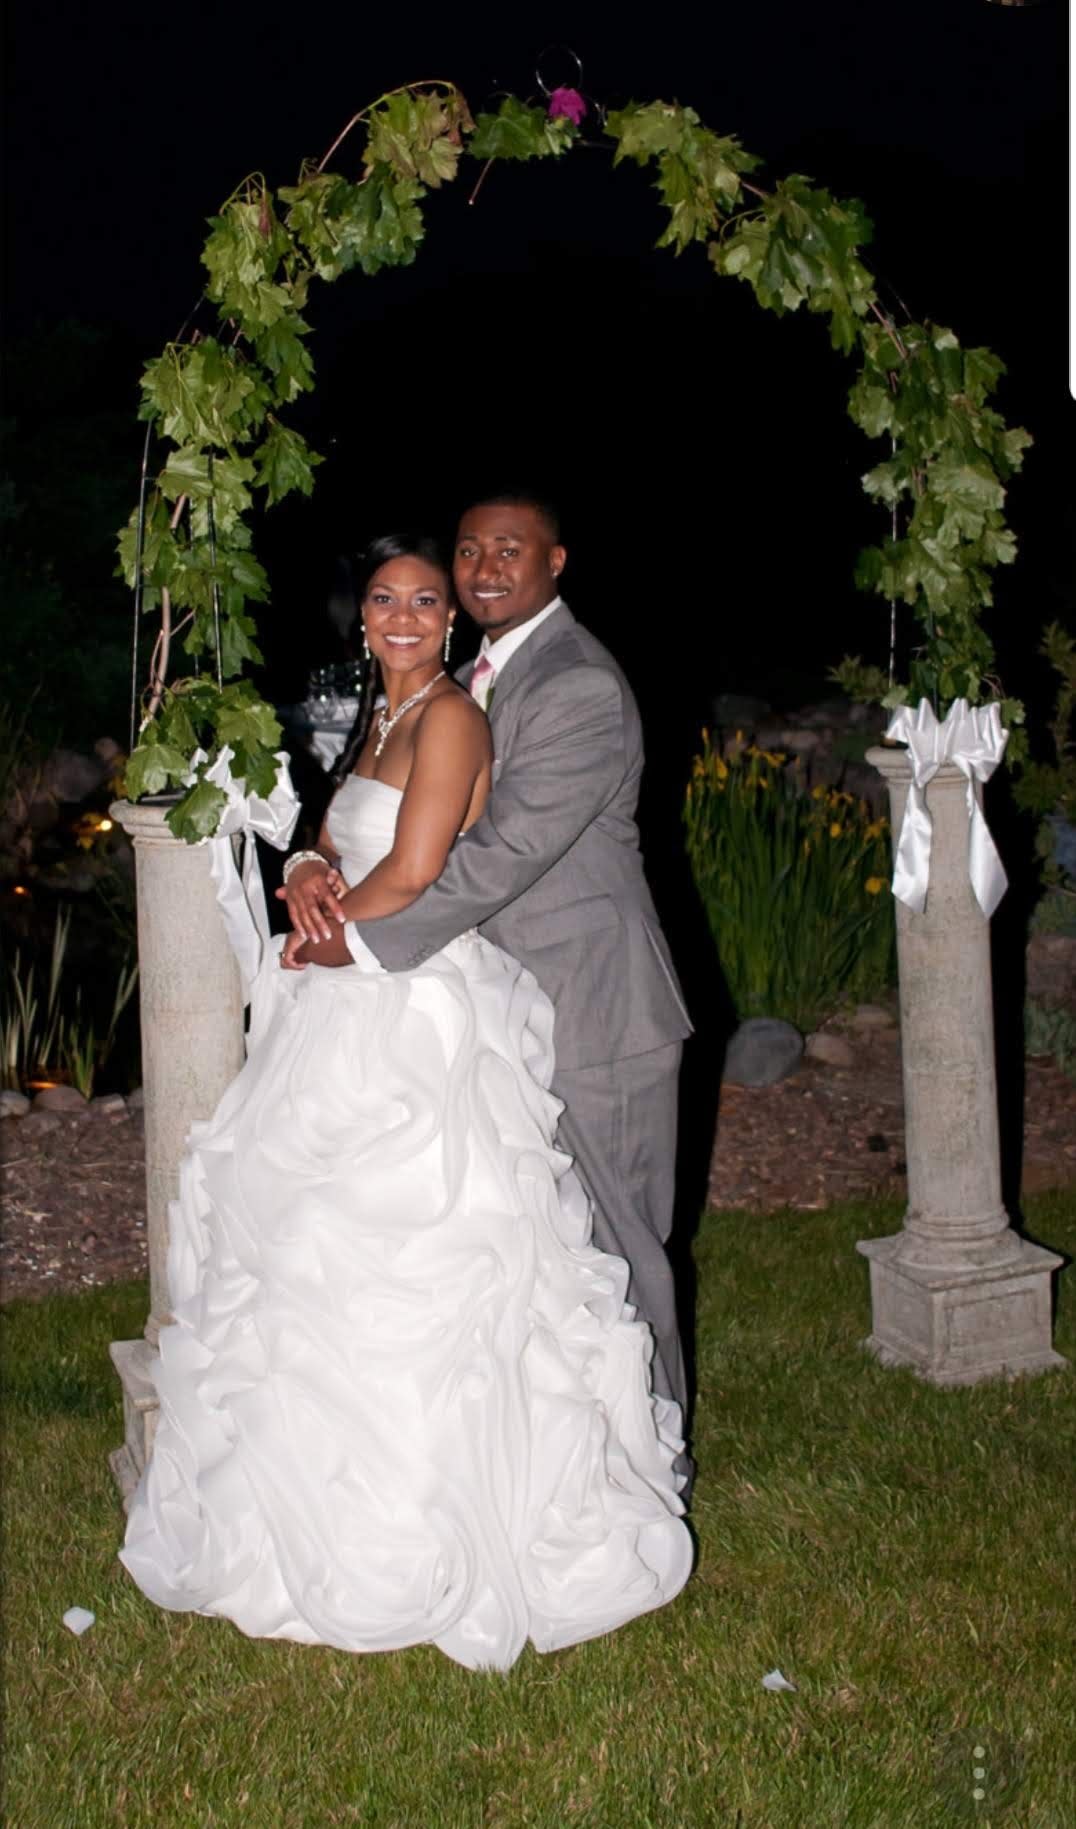 Sabrina Foulks-Thomas and her husband Chermond Thomas, who both graduated from Germantown High School, reconnected with each other more than 10 years after graduating. They now live in Sussex.